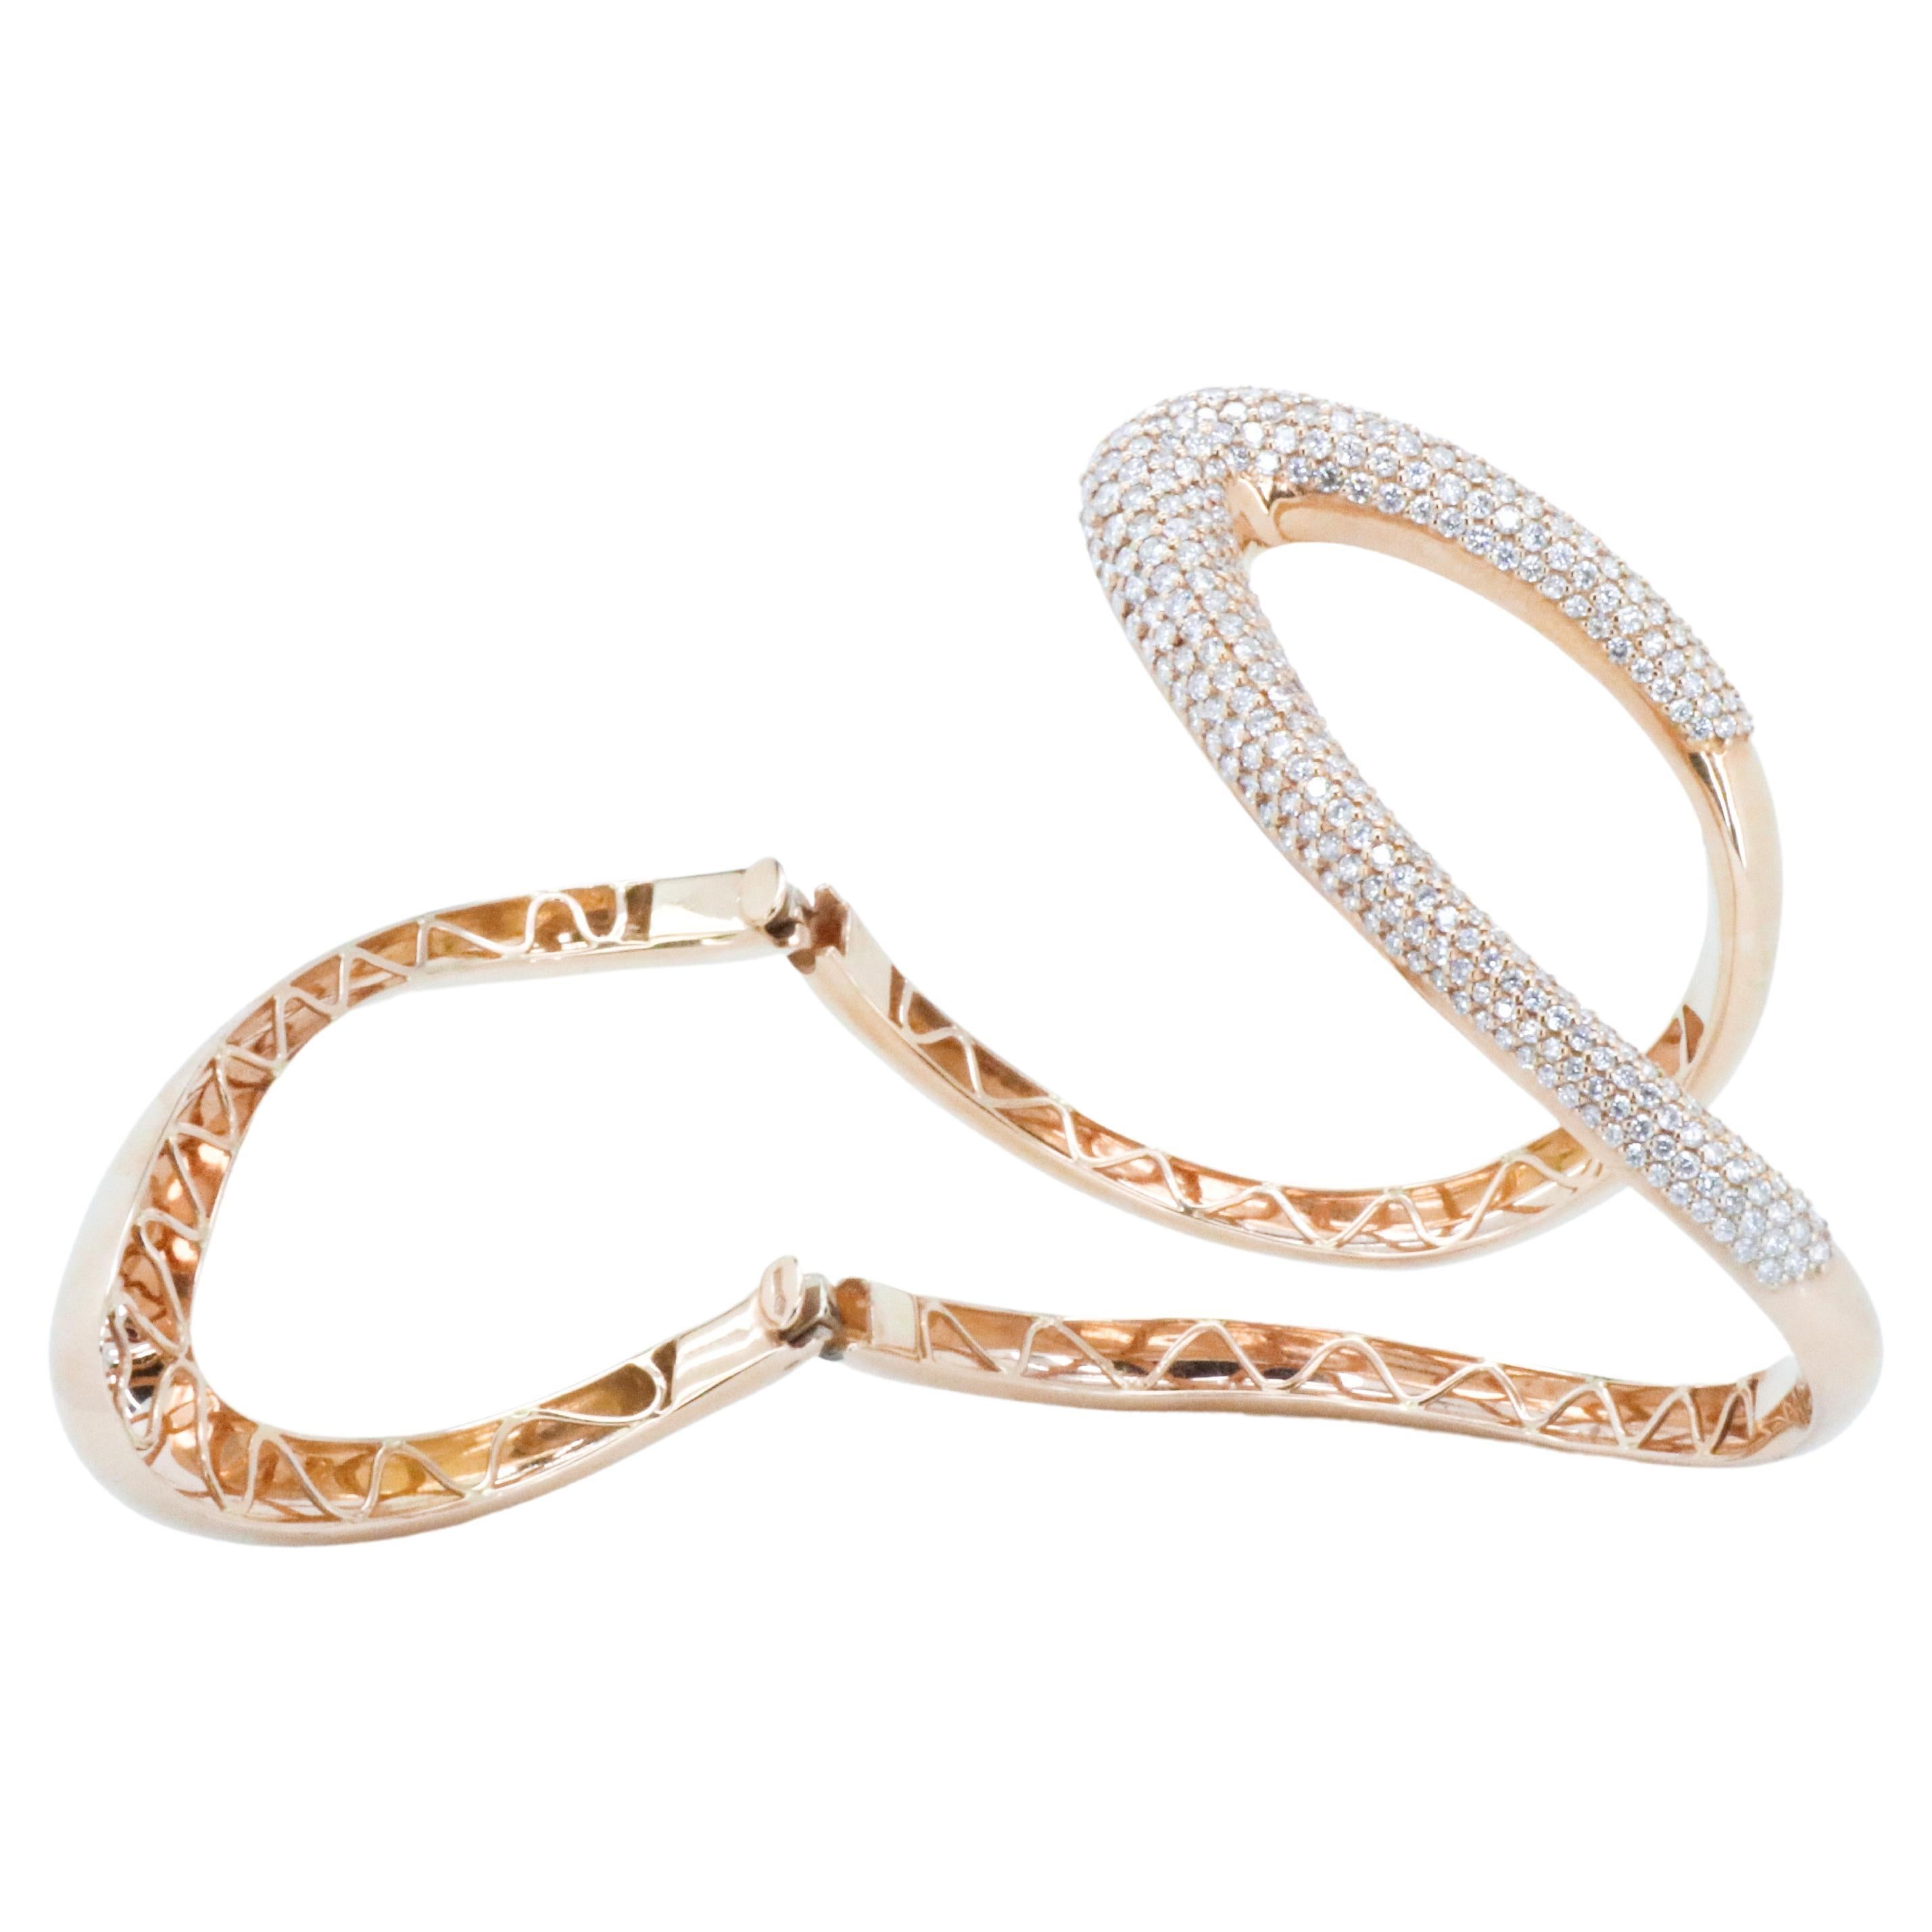 Round Cut Contemporary Beatrice Barzaghi Awarded 9 Ct Diamond Pave Gold Clamper Bracelet For Sale